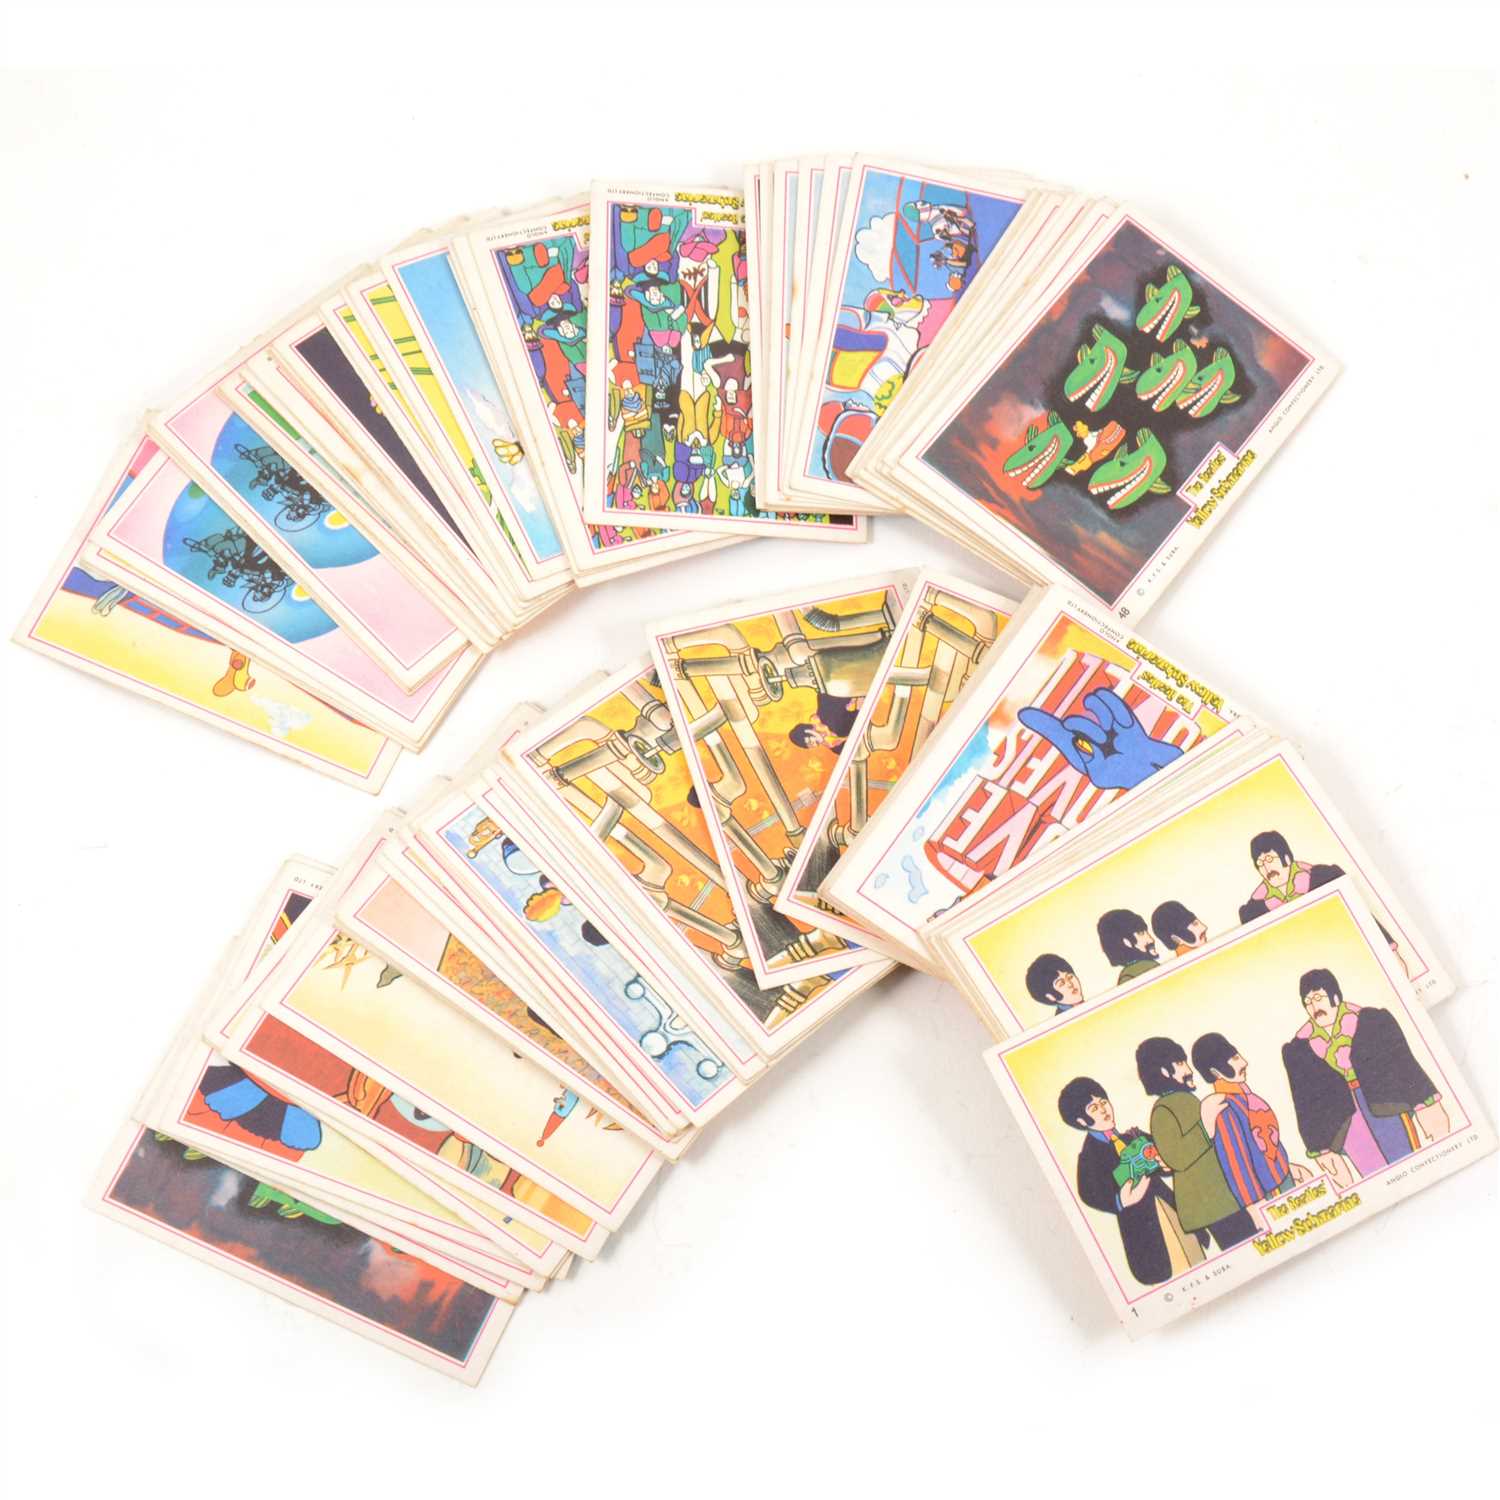 Lot 634 - The Beatles Yellow Submarine trading gum cards; a large quantity of 102 cards, including many duplications but not a full run.